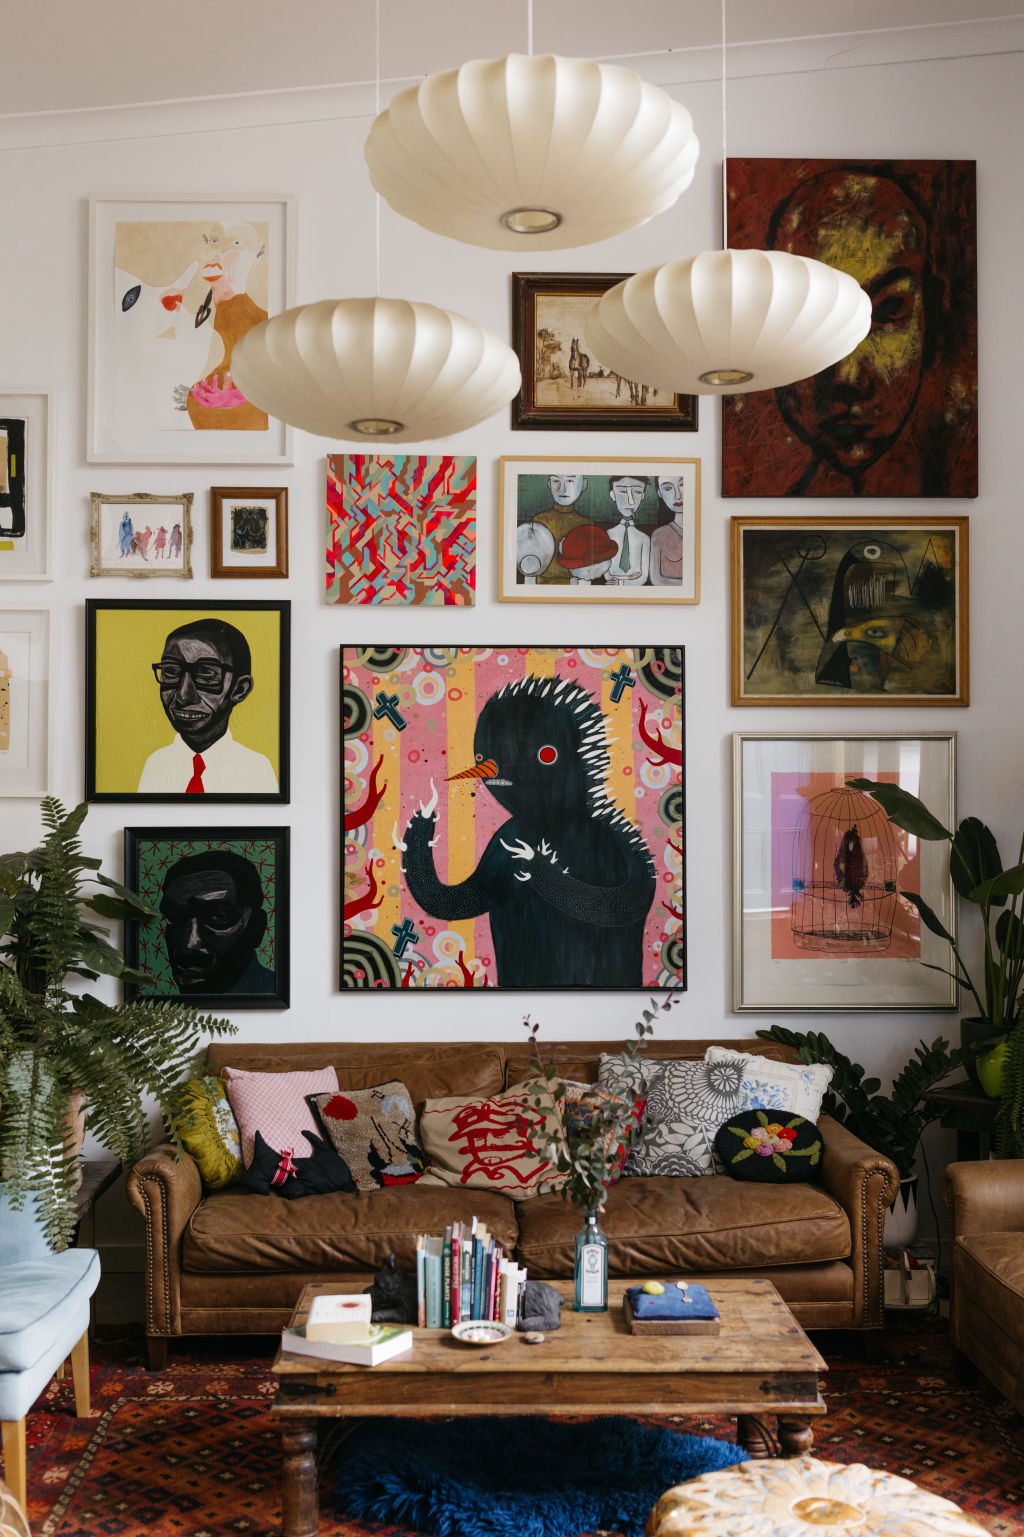 'My house has become a bit of a canvas,' says Yeow. Photo: Dan Evans